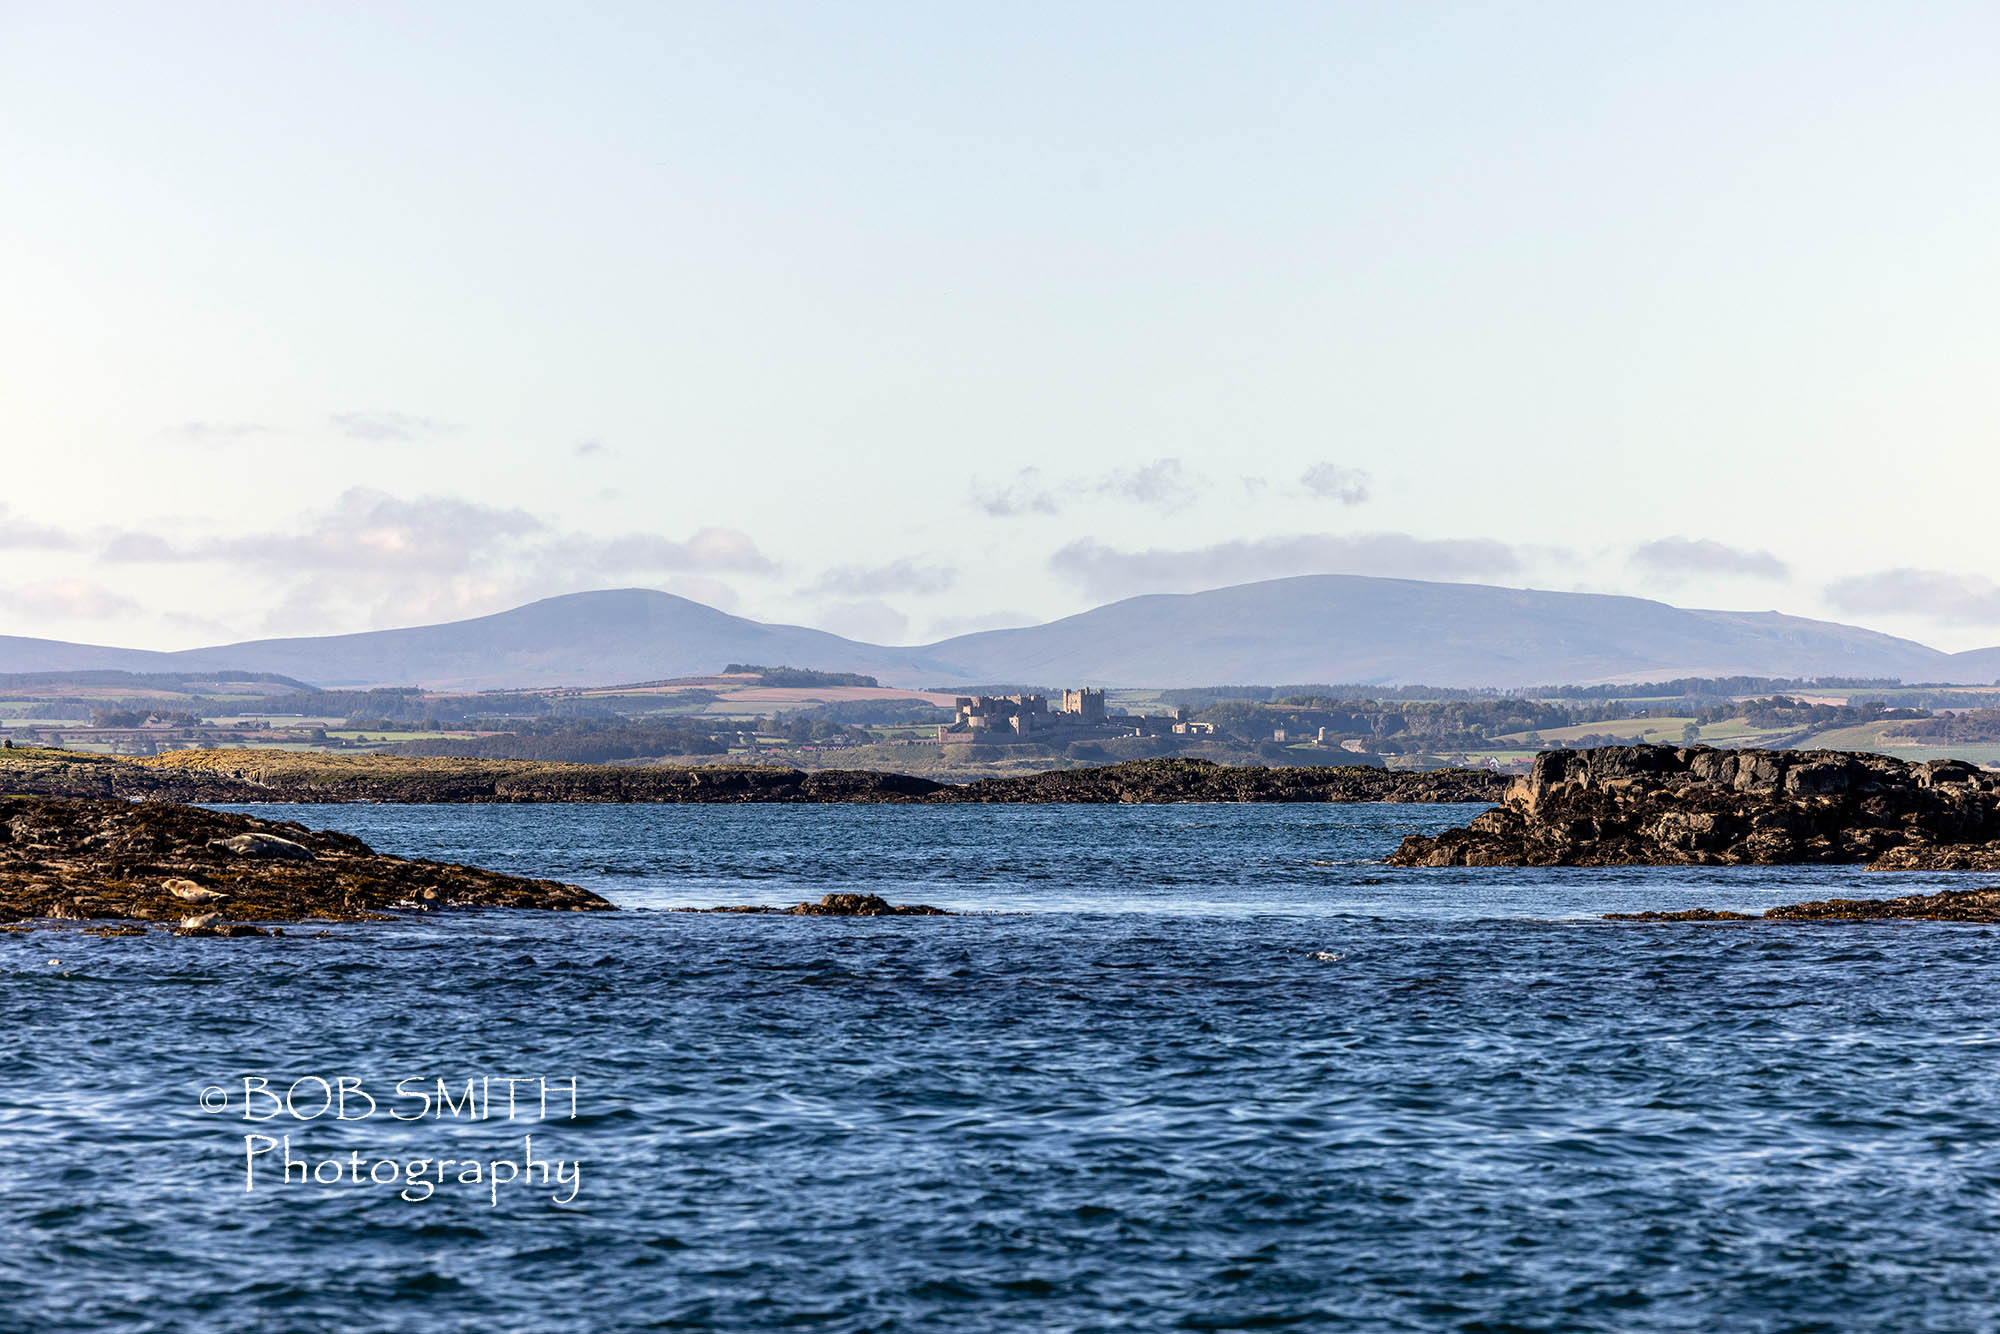 The Northumberland seen from the Farne Islands, with Bamburgh Castle visible and, beyond, The Cheviot and Hedgehope Hill